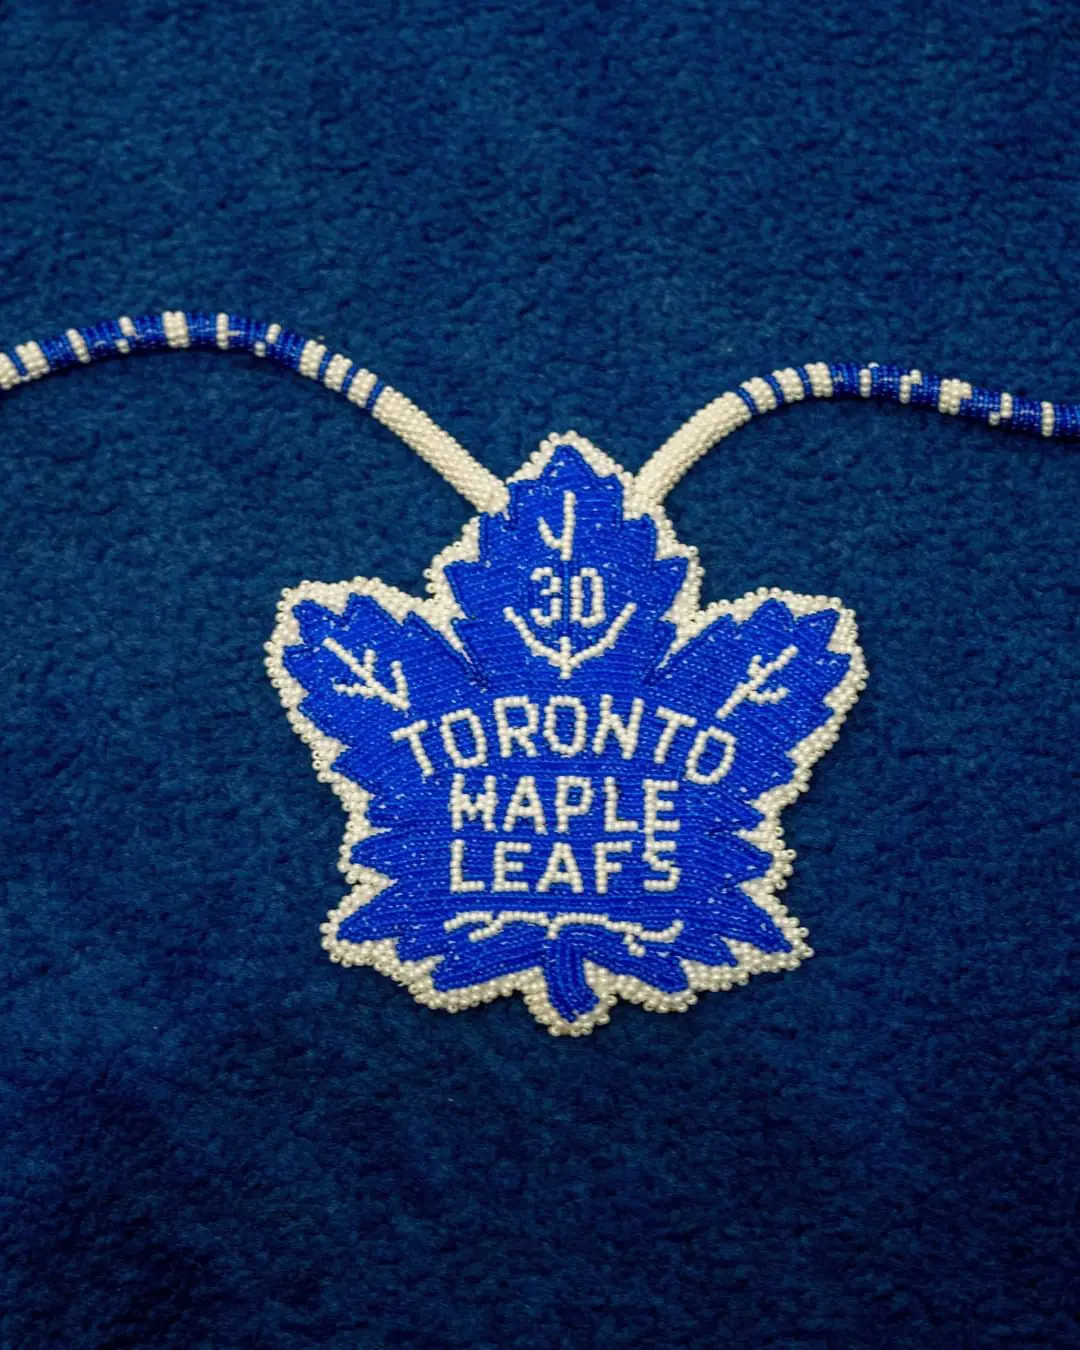 Fans feel that the Leafs need to come up with a full indigenous inspired uniform.